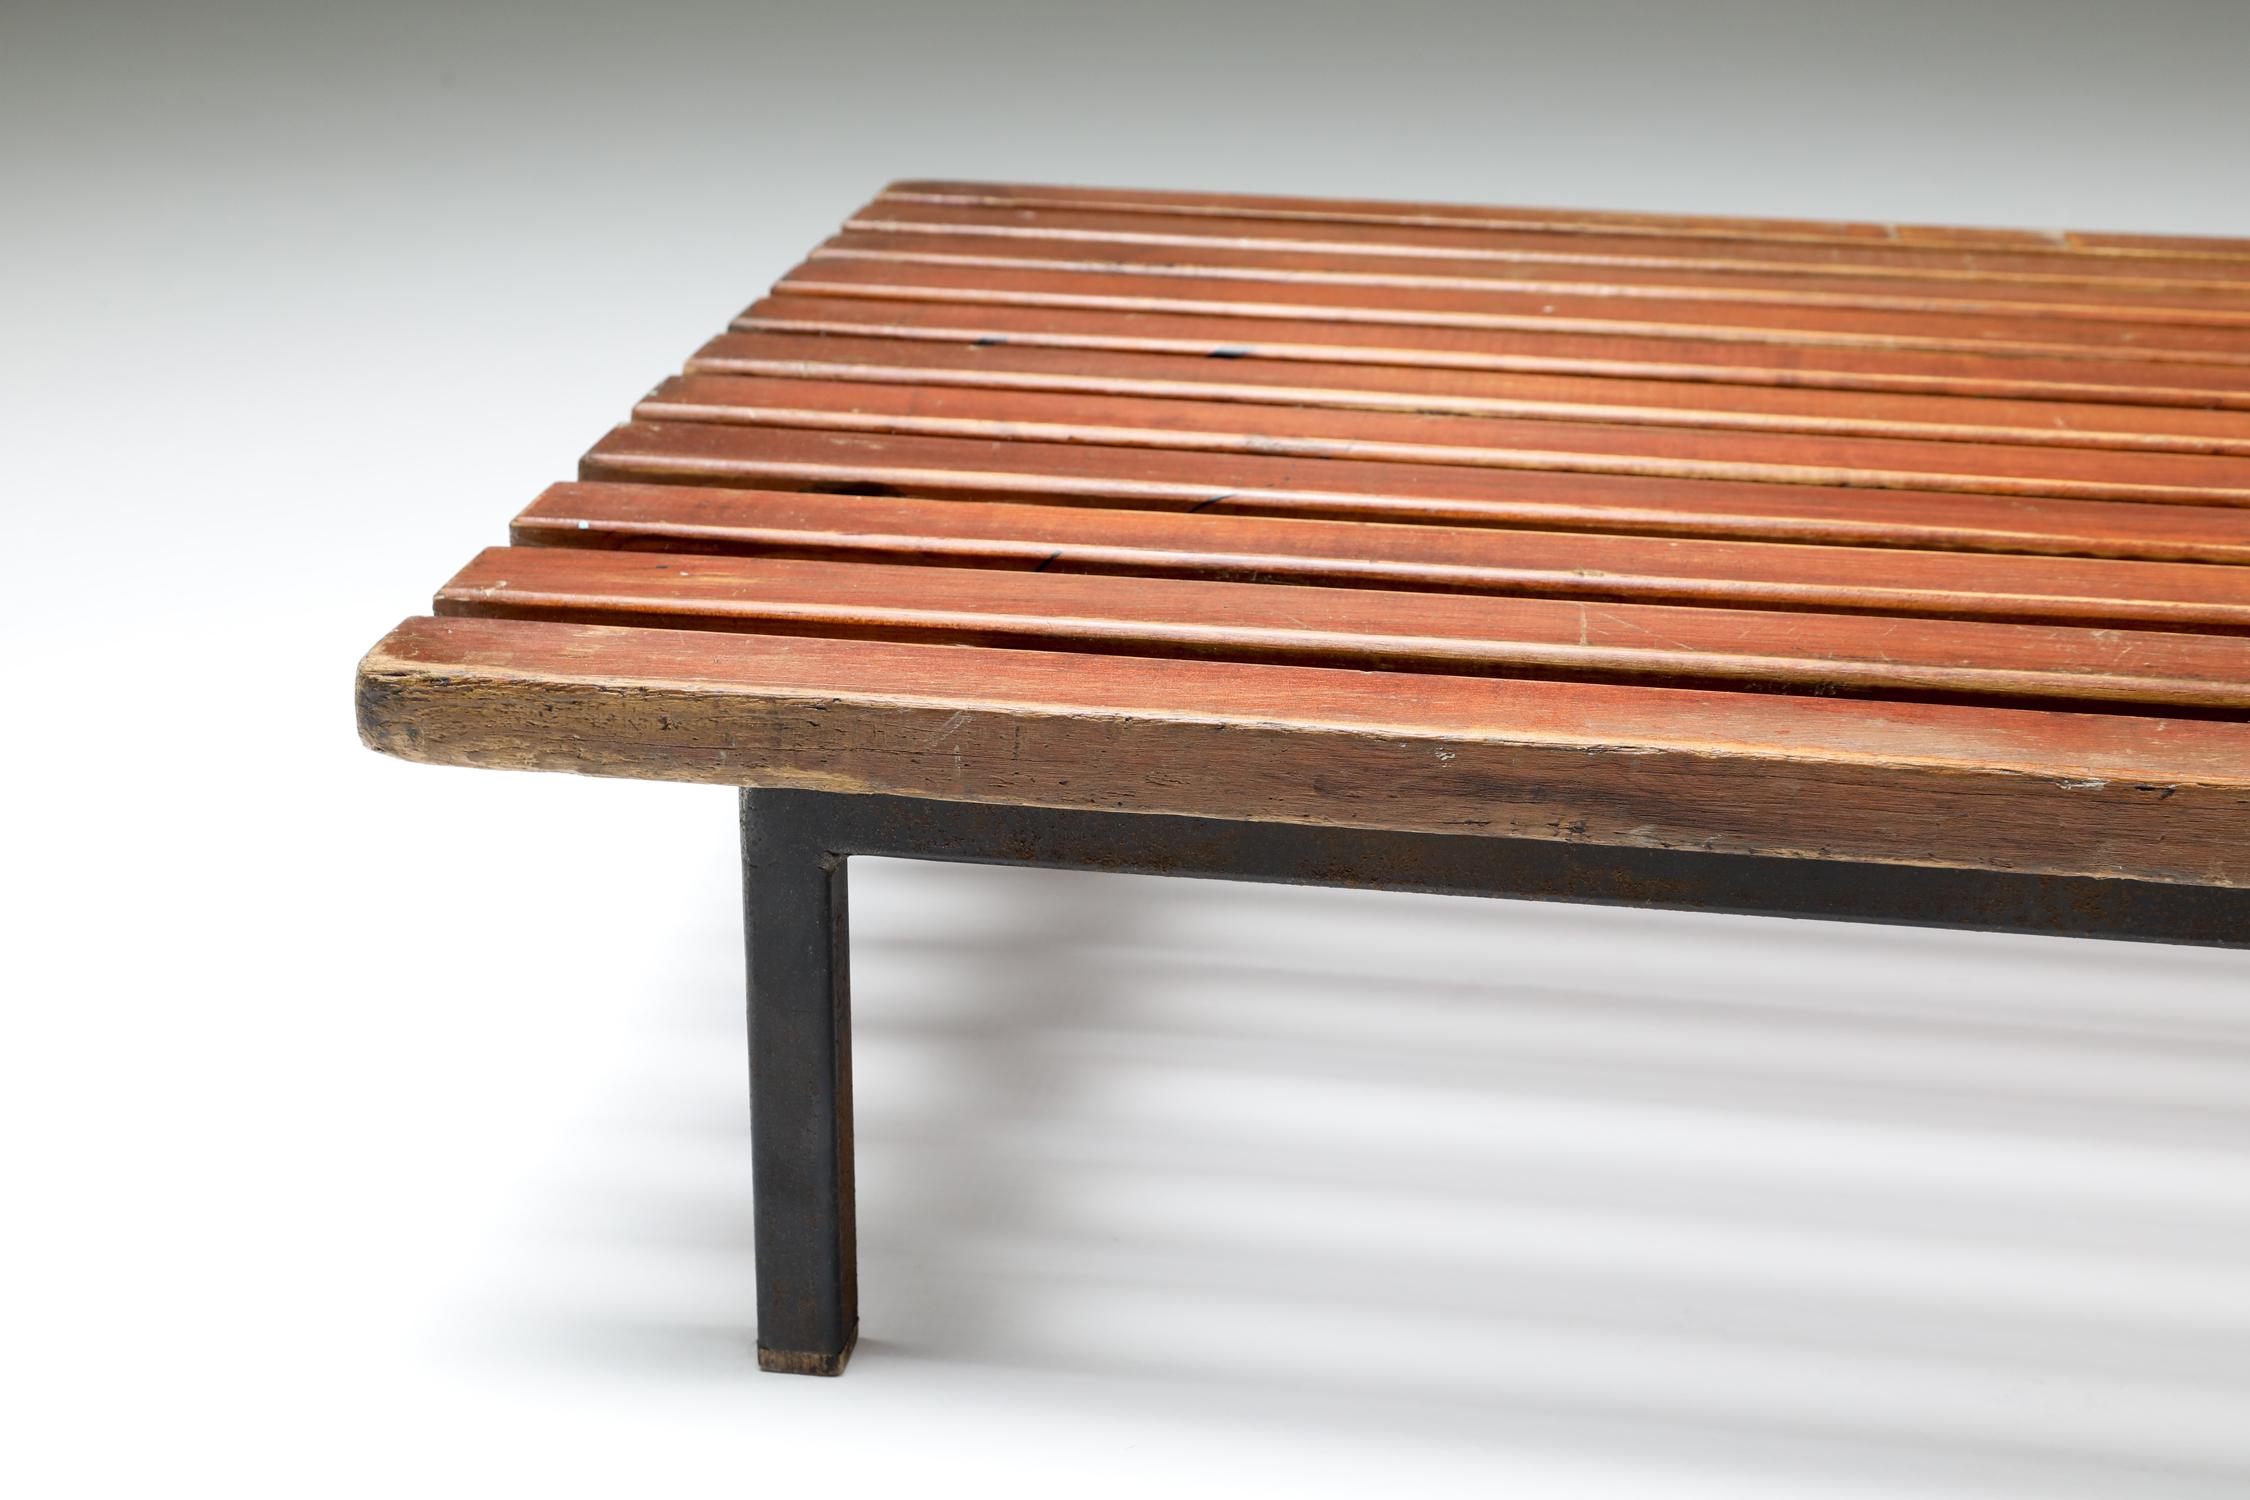 Steel Charlotte Perriand 'Cansado' Low Bench